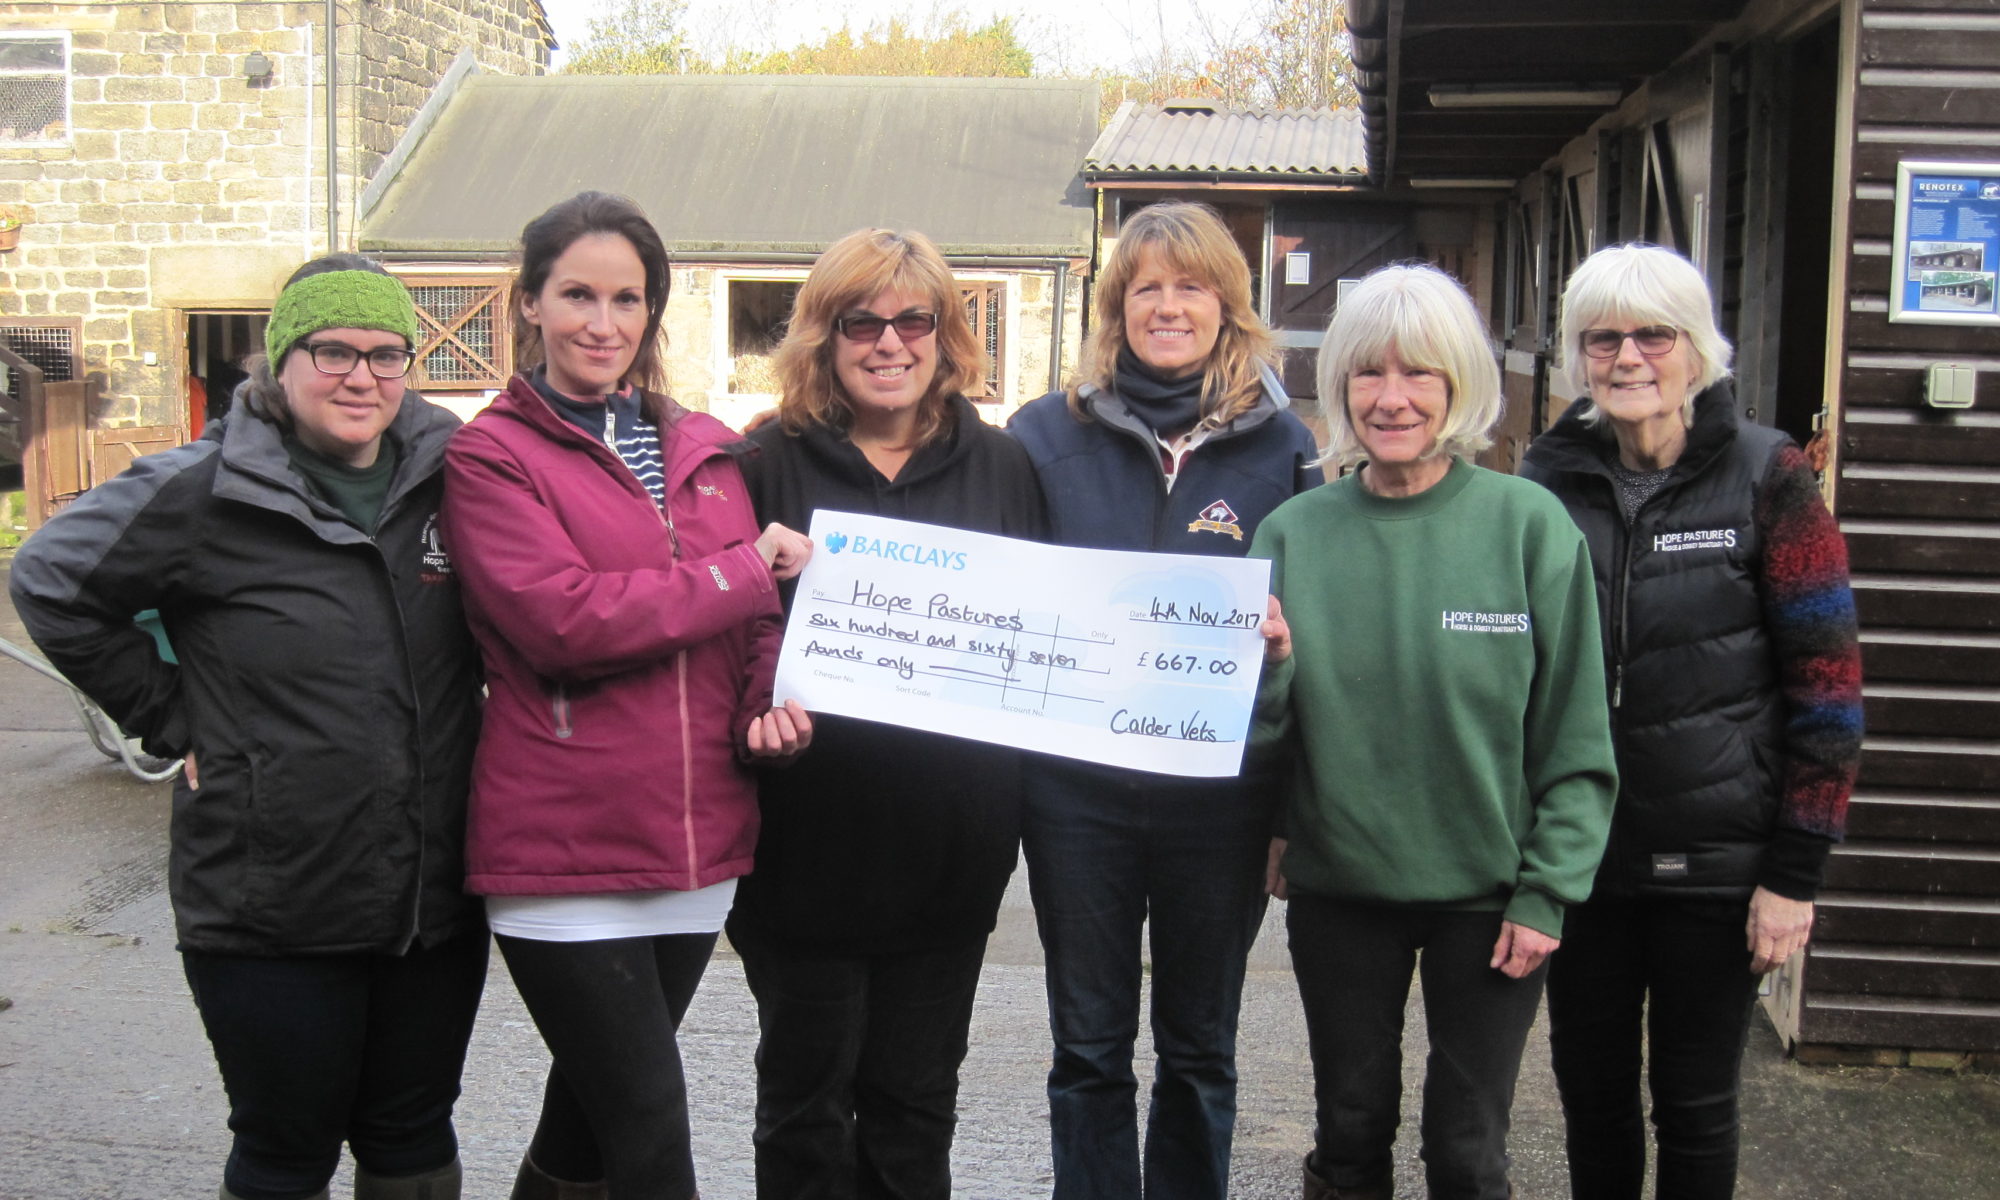 Calder Vets staff raise more than £650 for Hope Pastures